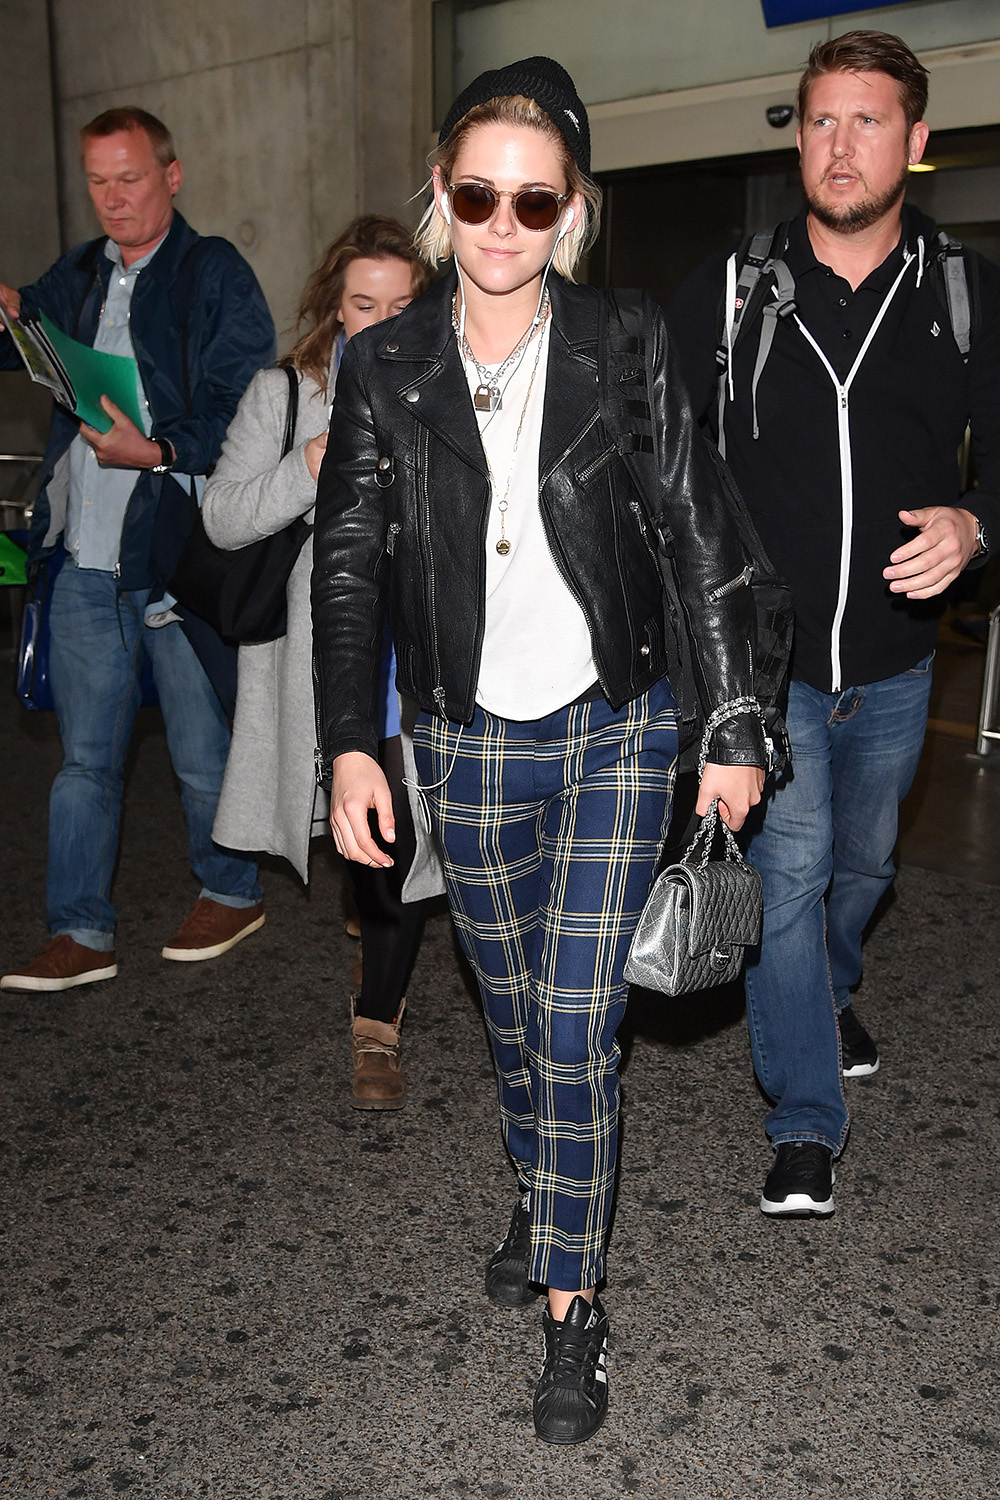 Kristen Stewart looks ready to rock and roll in a pair of plaid pants and leather jacket as she touches down in France to promote her new film Cafe Society in Cannes.